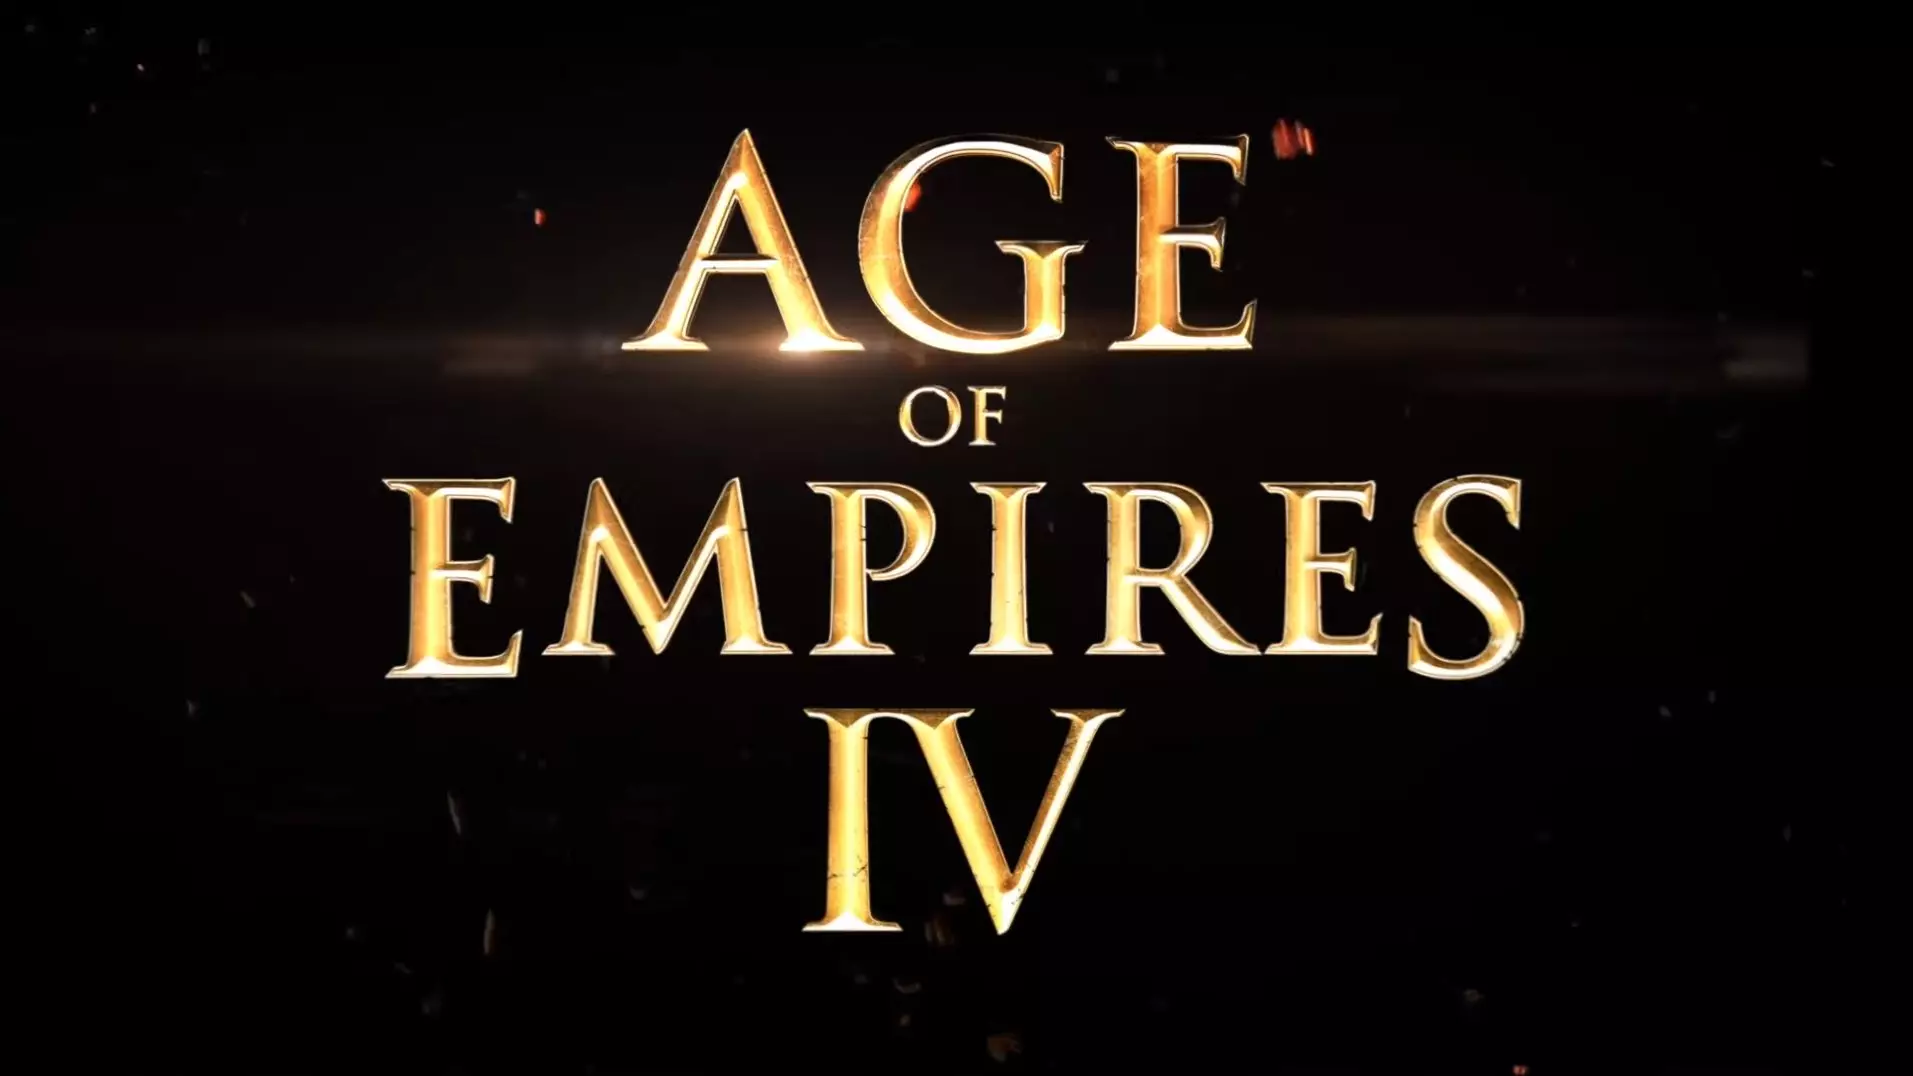 When will we finally see Age of Empires 4?